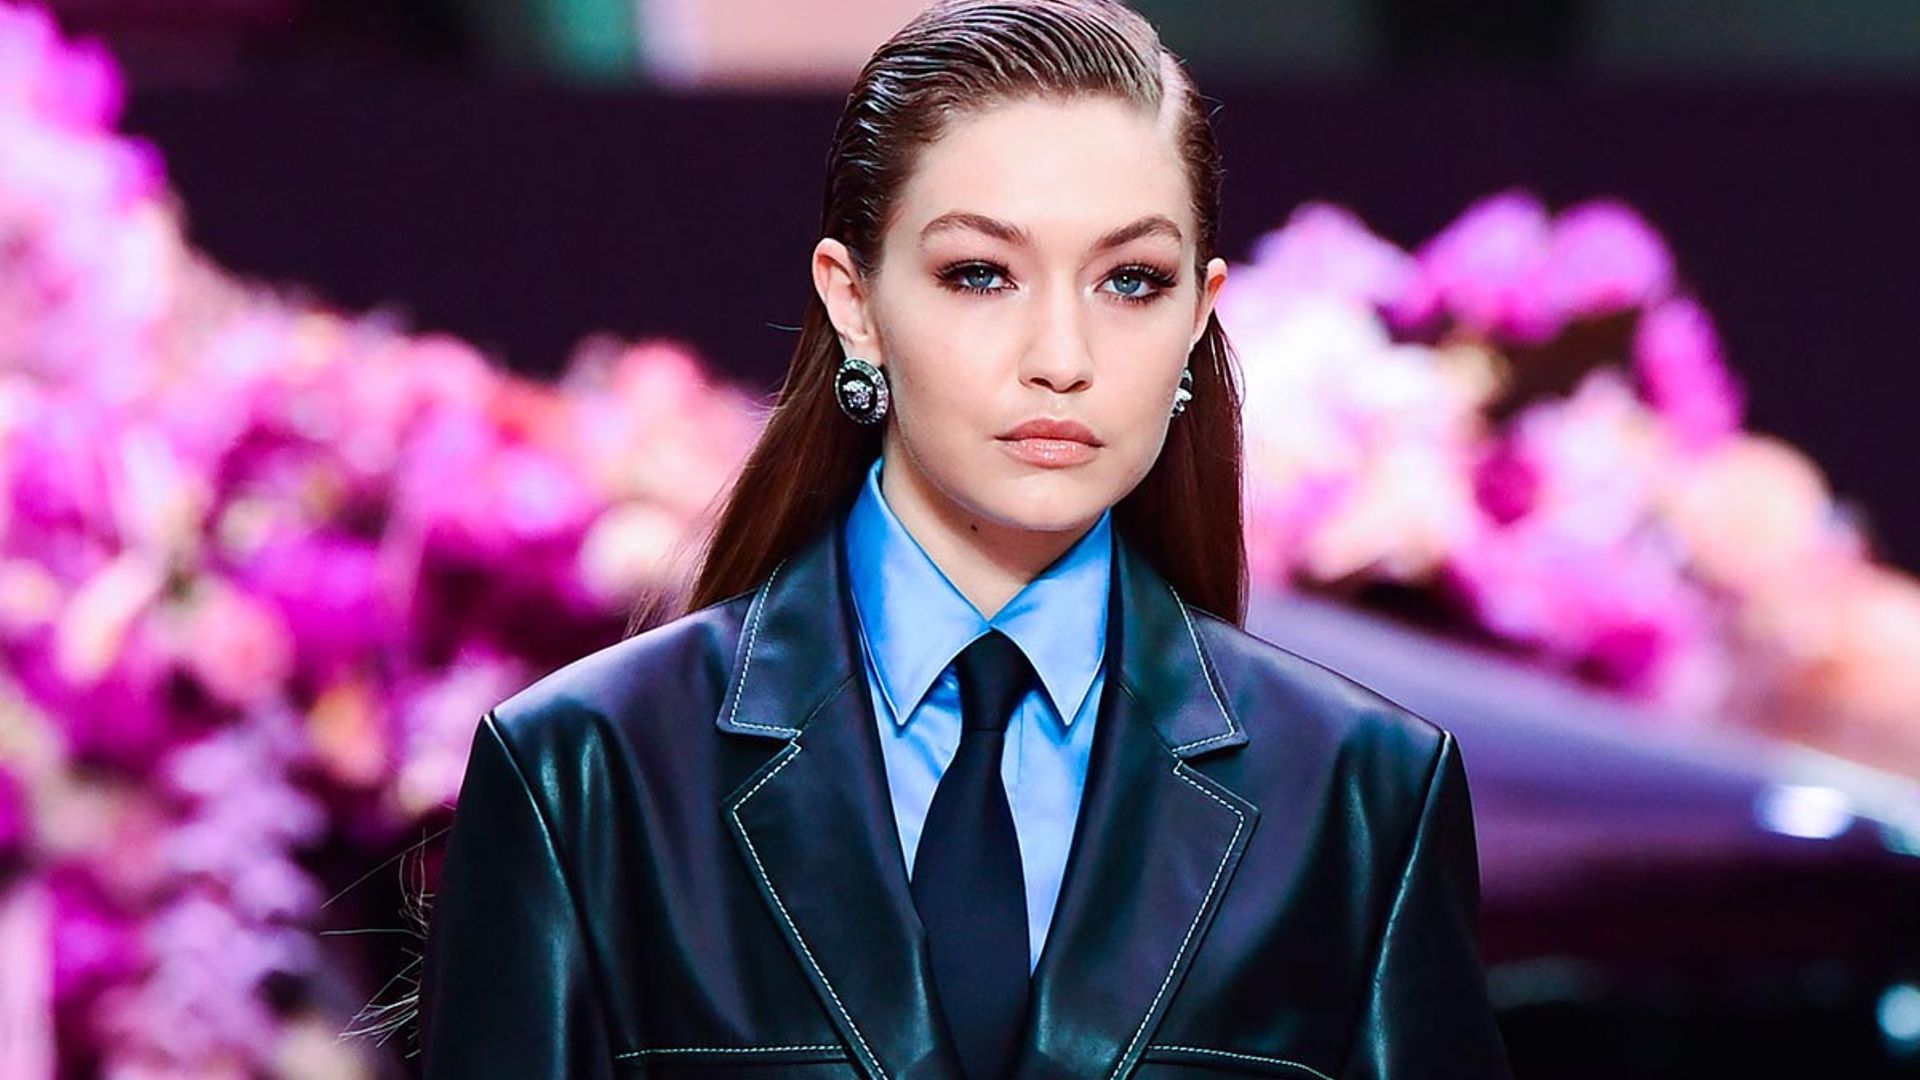 Can we just talk about Gigi Hadid's latest catwalk looks?! WOW